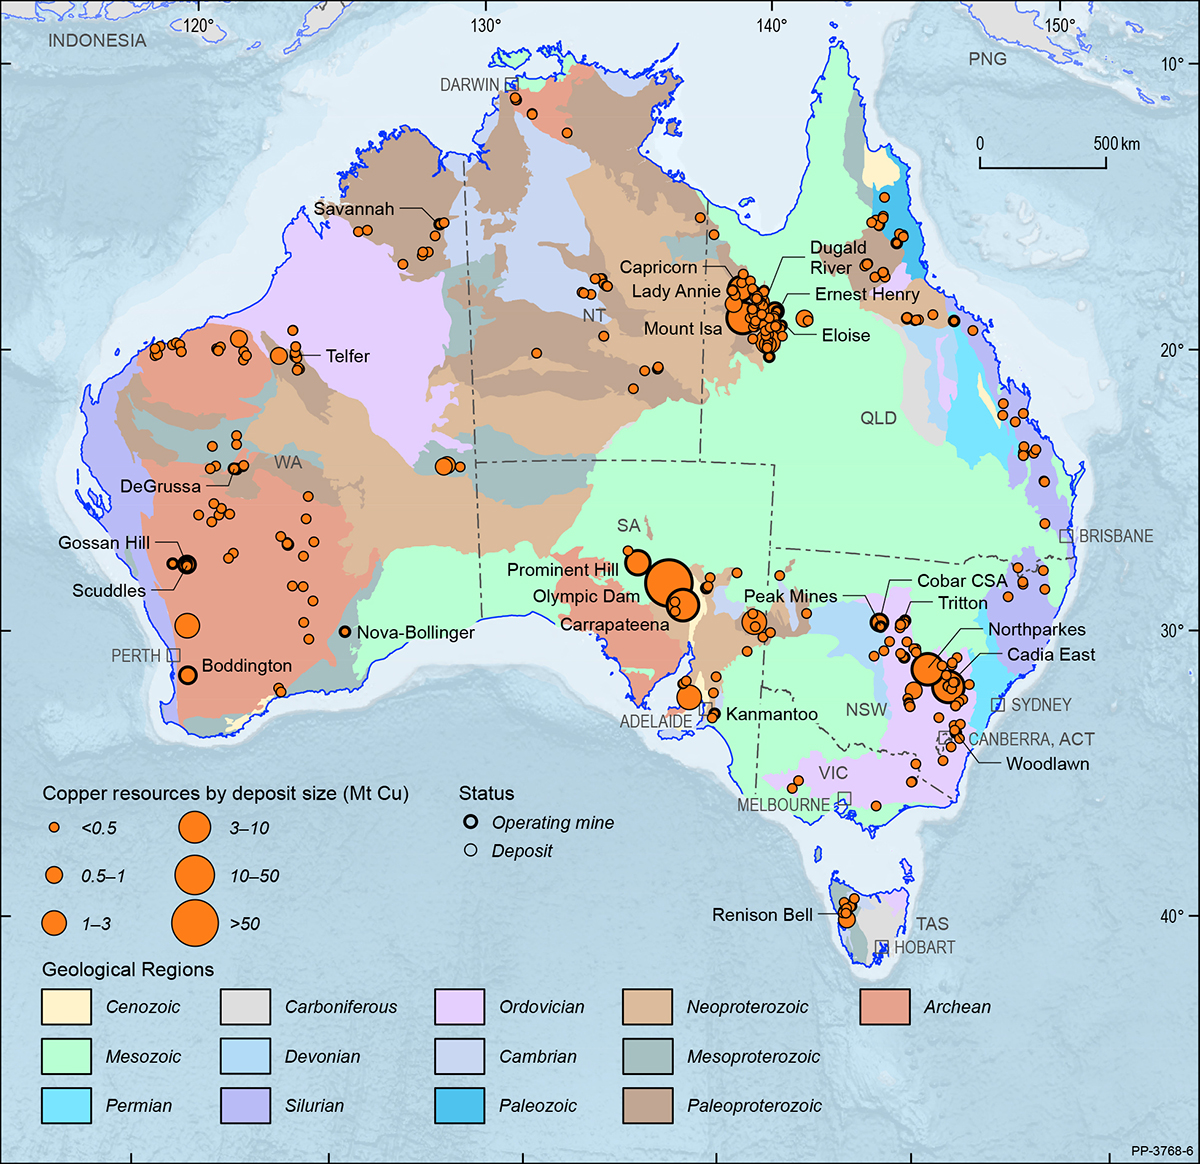 A map showing the Australian continent shaded by the ages of the main geological provinces highlighting the geographical distribution of Australian copper deposits and operating mines in 2019.